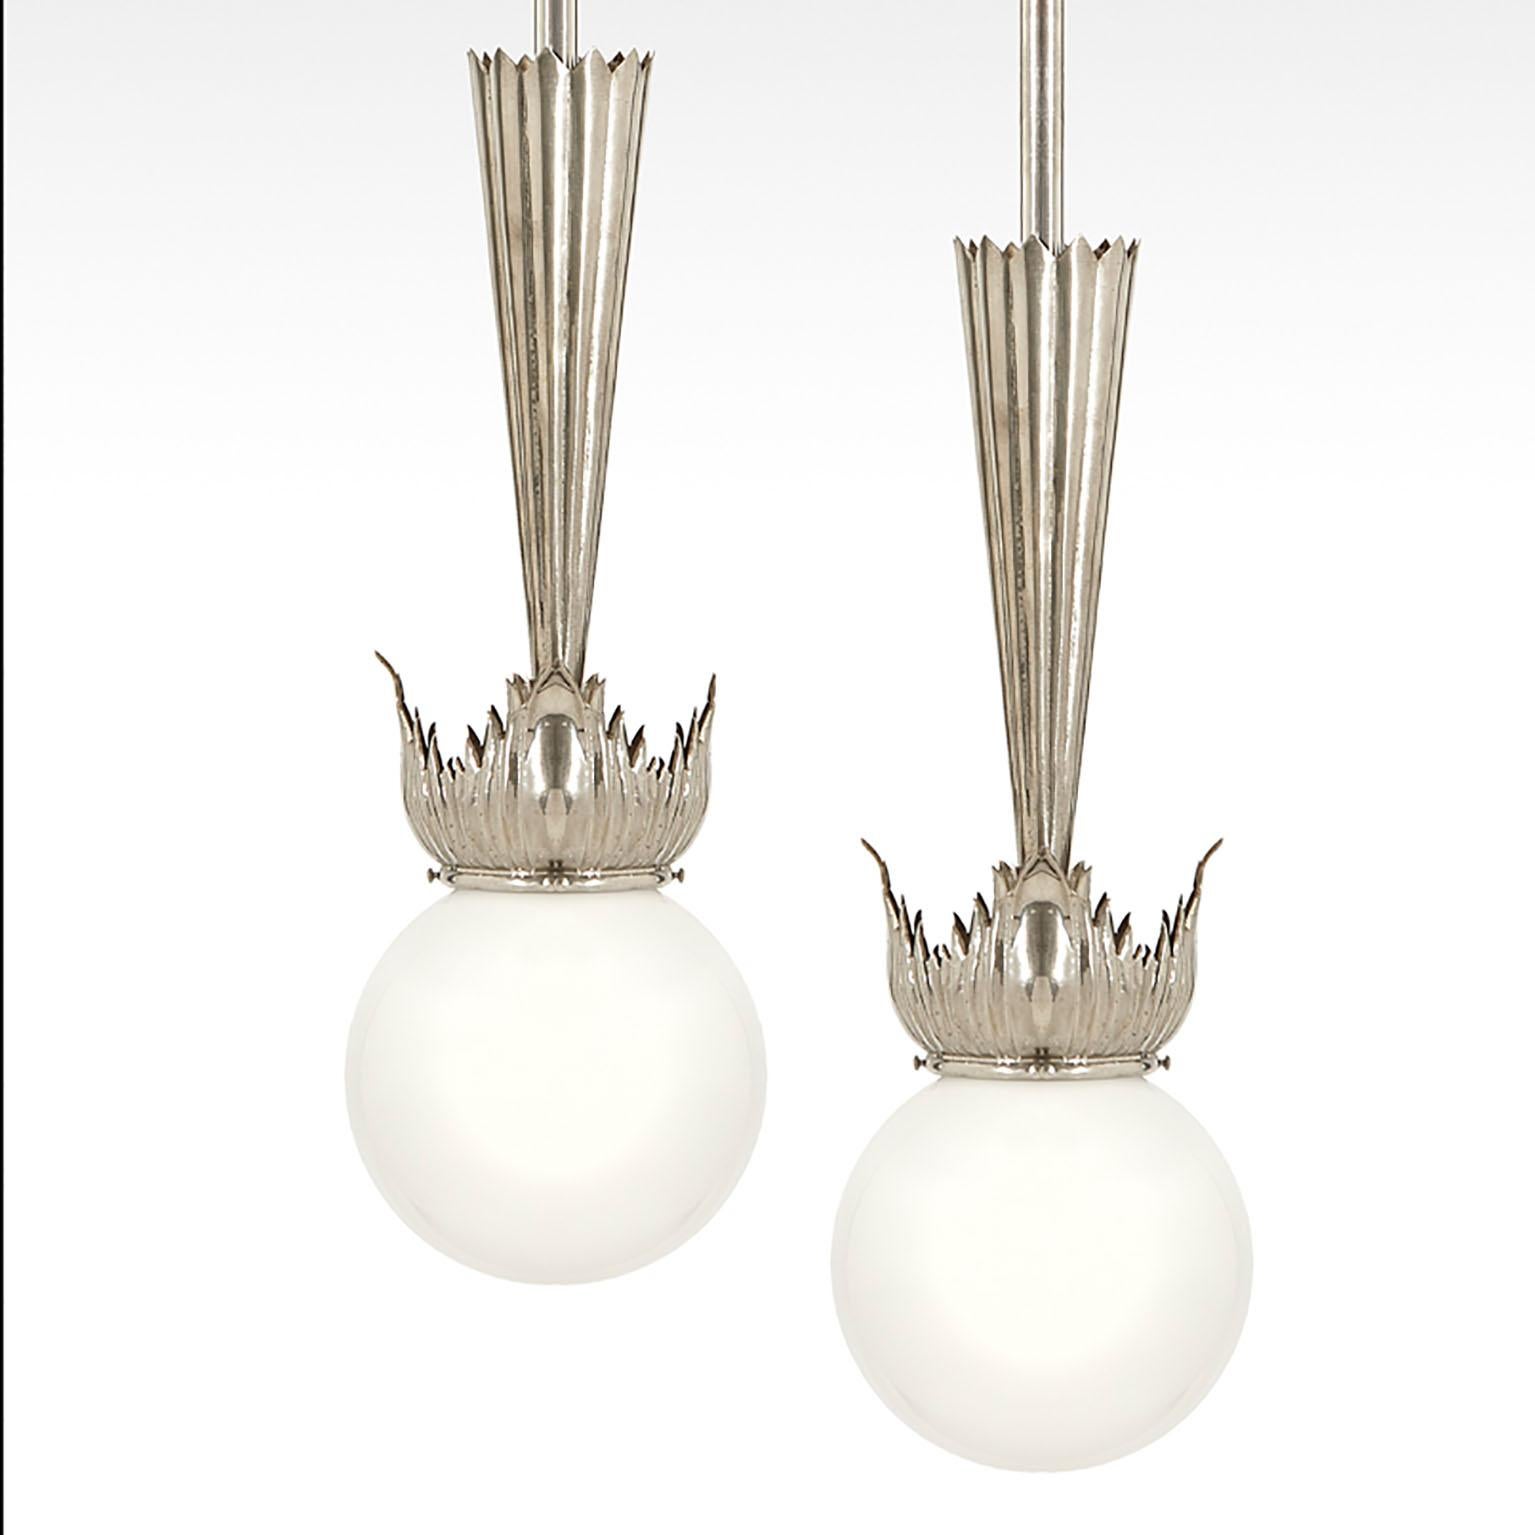 These excellent and elegant pair of Austrian Art Deco Pendant lamps have been designed by school of Dagobert Peche in Vienna, around 1925. 
They feature excellent handcrafted nickel plated brass parts with opaline glass ball shades.
 
At the